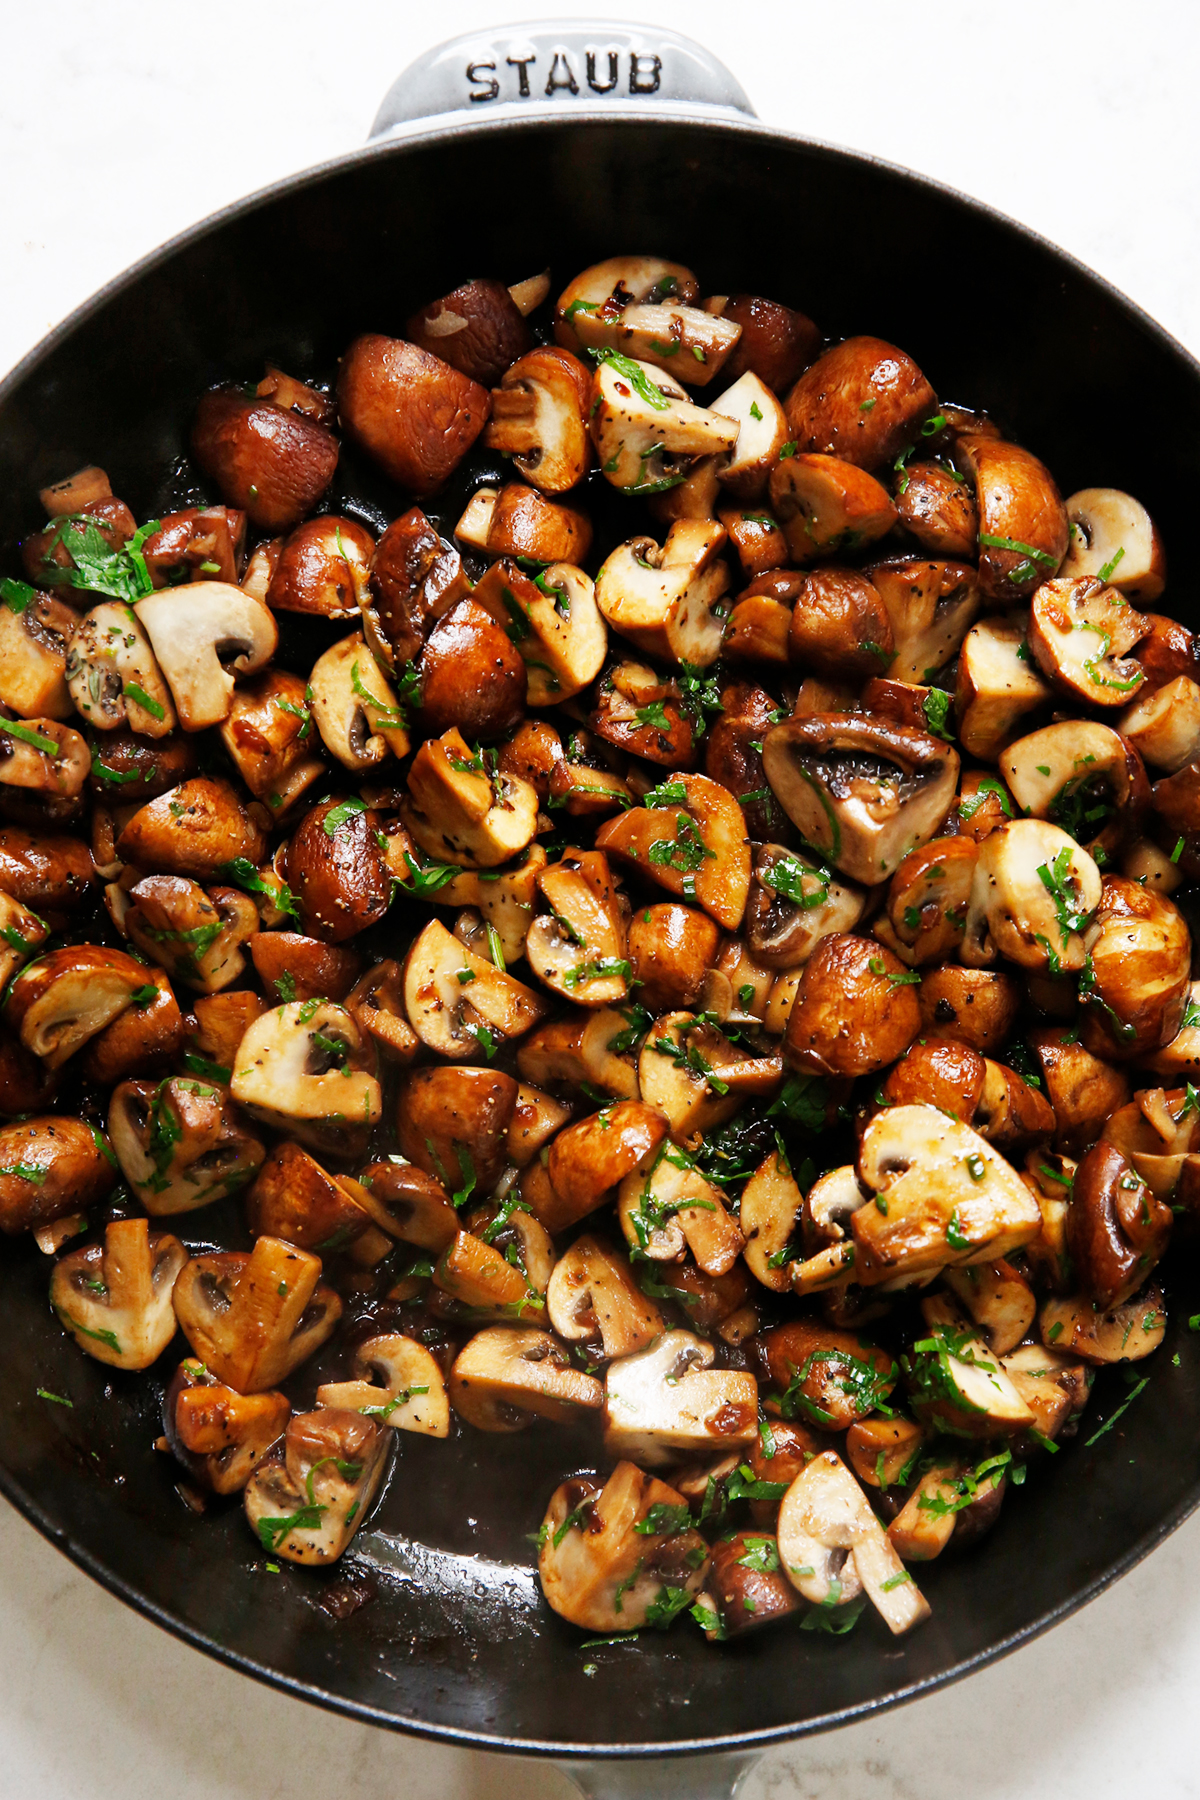 Garlic mushrooms with tons of herbs in a saute pan